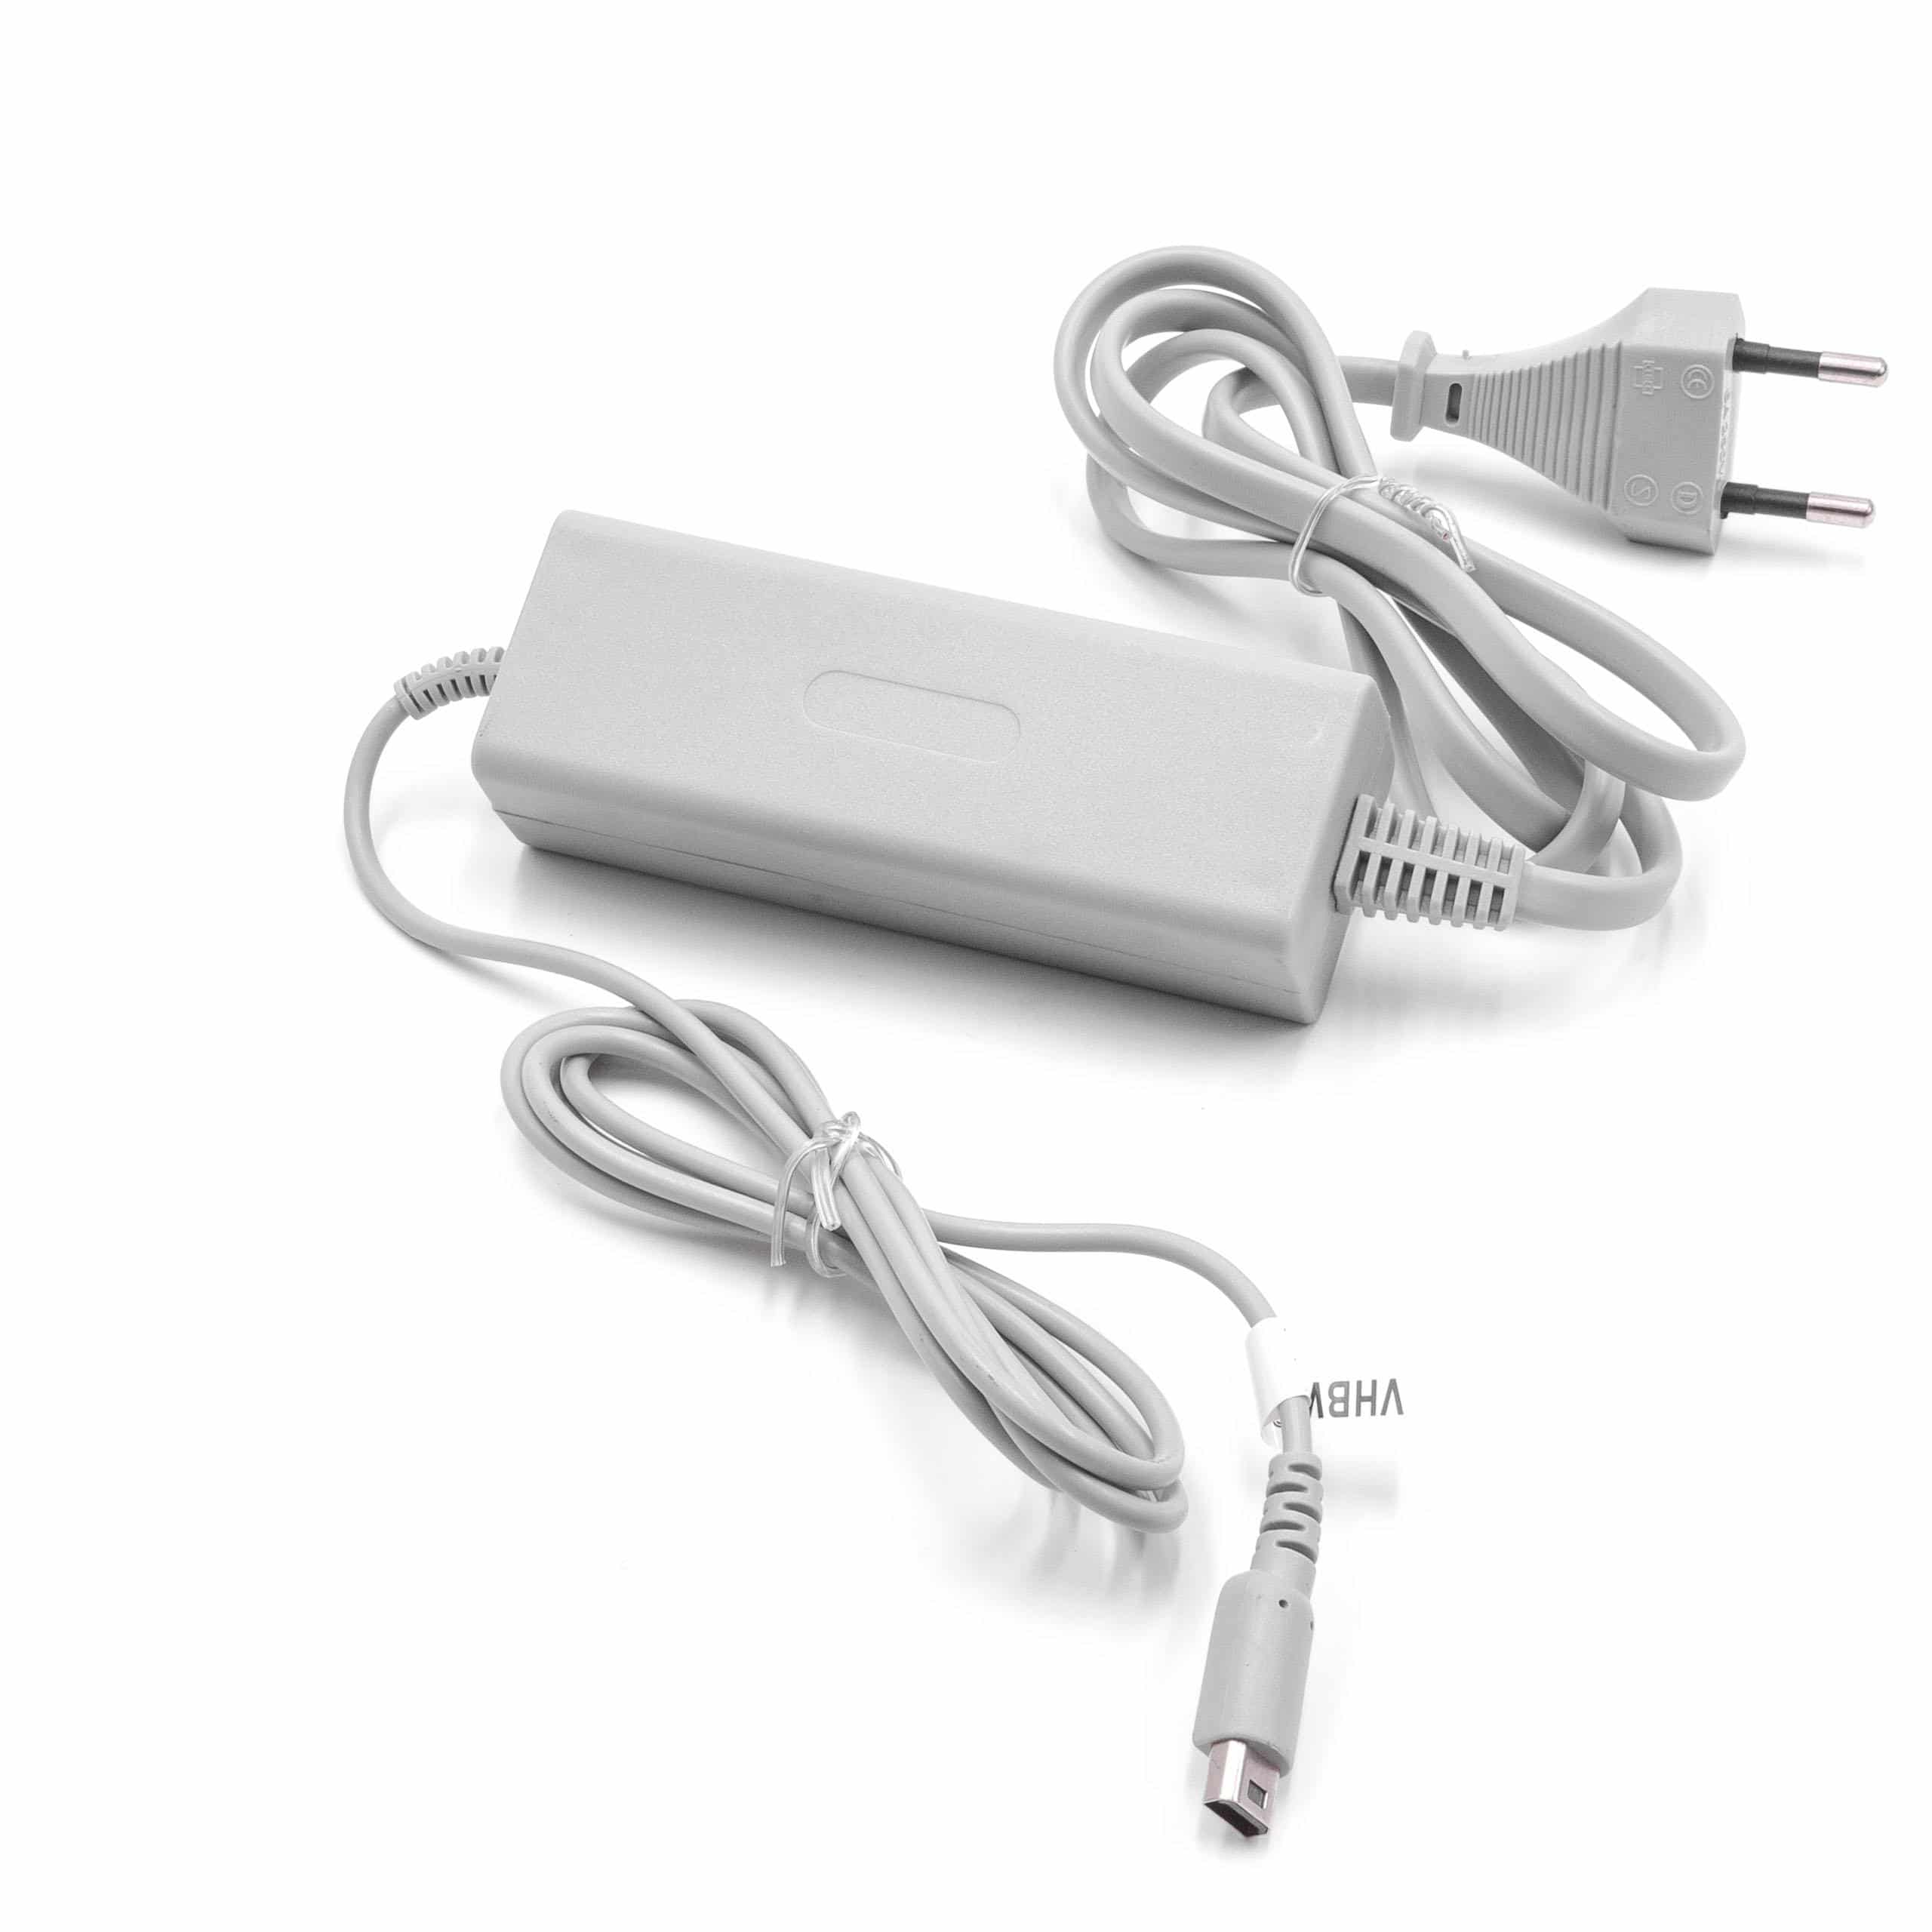 Mains Power Adapter replaces Nintendo SND-319 for Nintendo Game Console